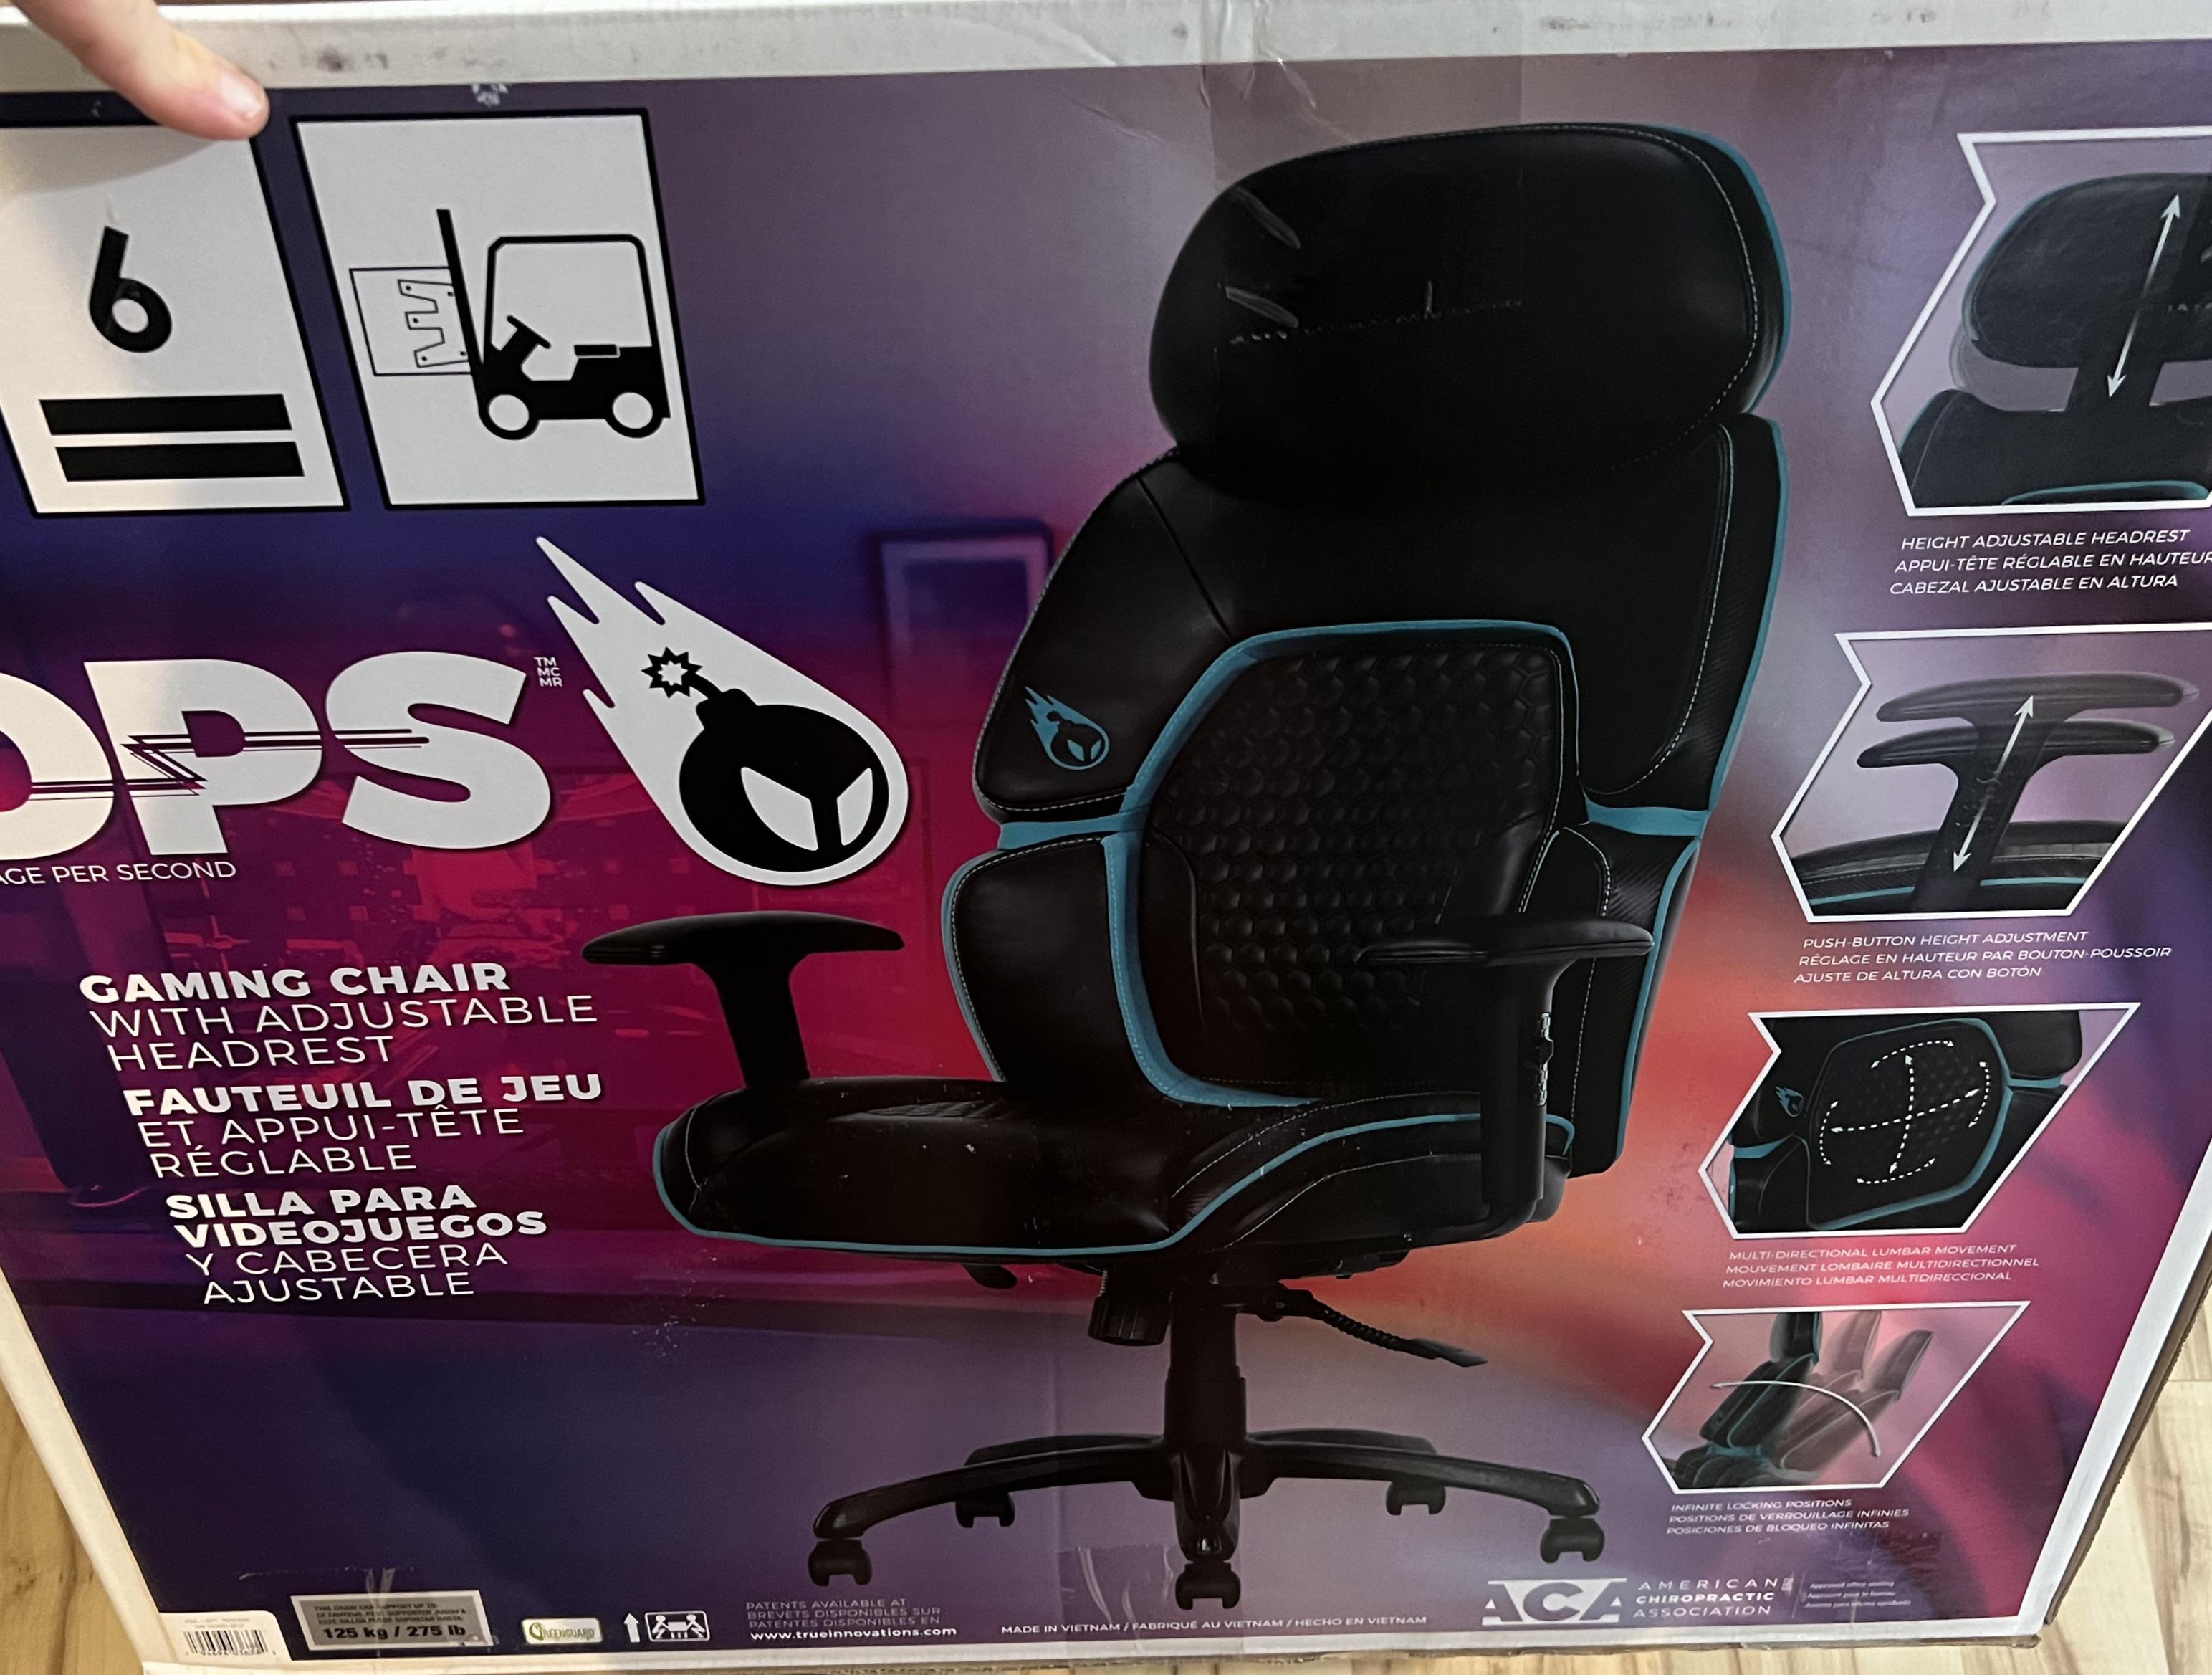 costco gaming chair